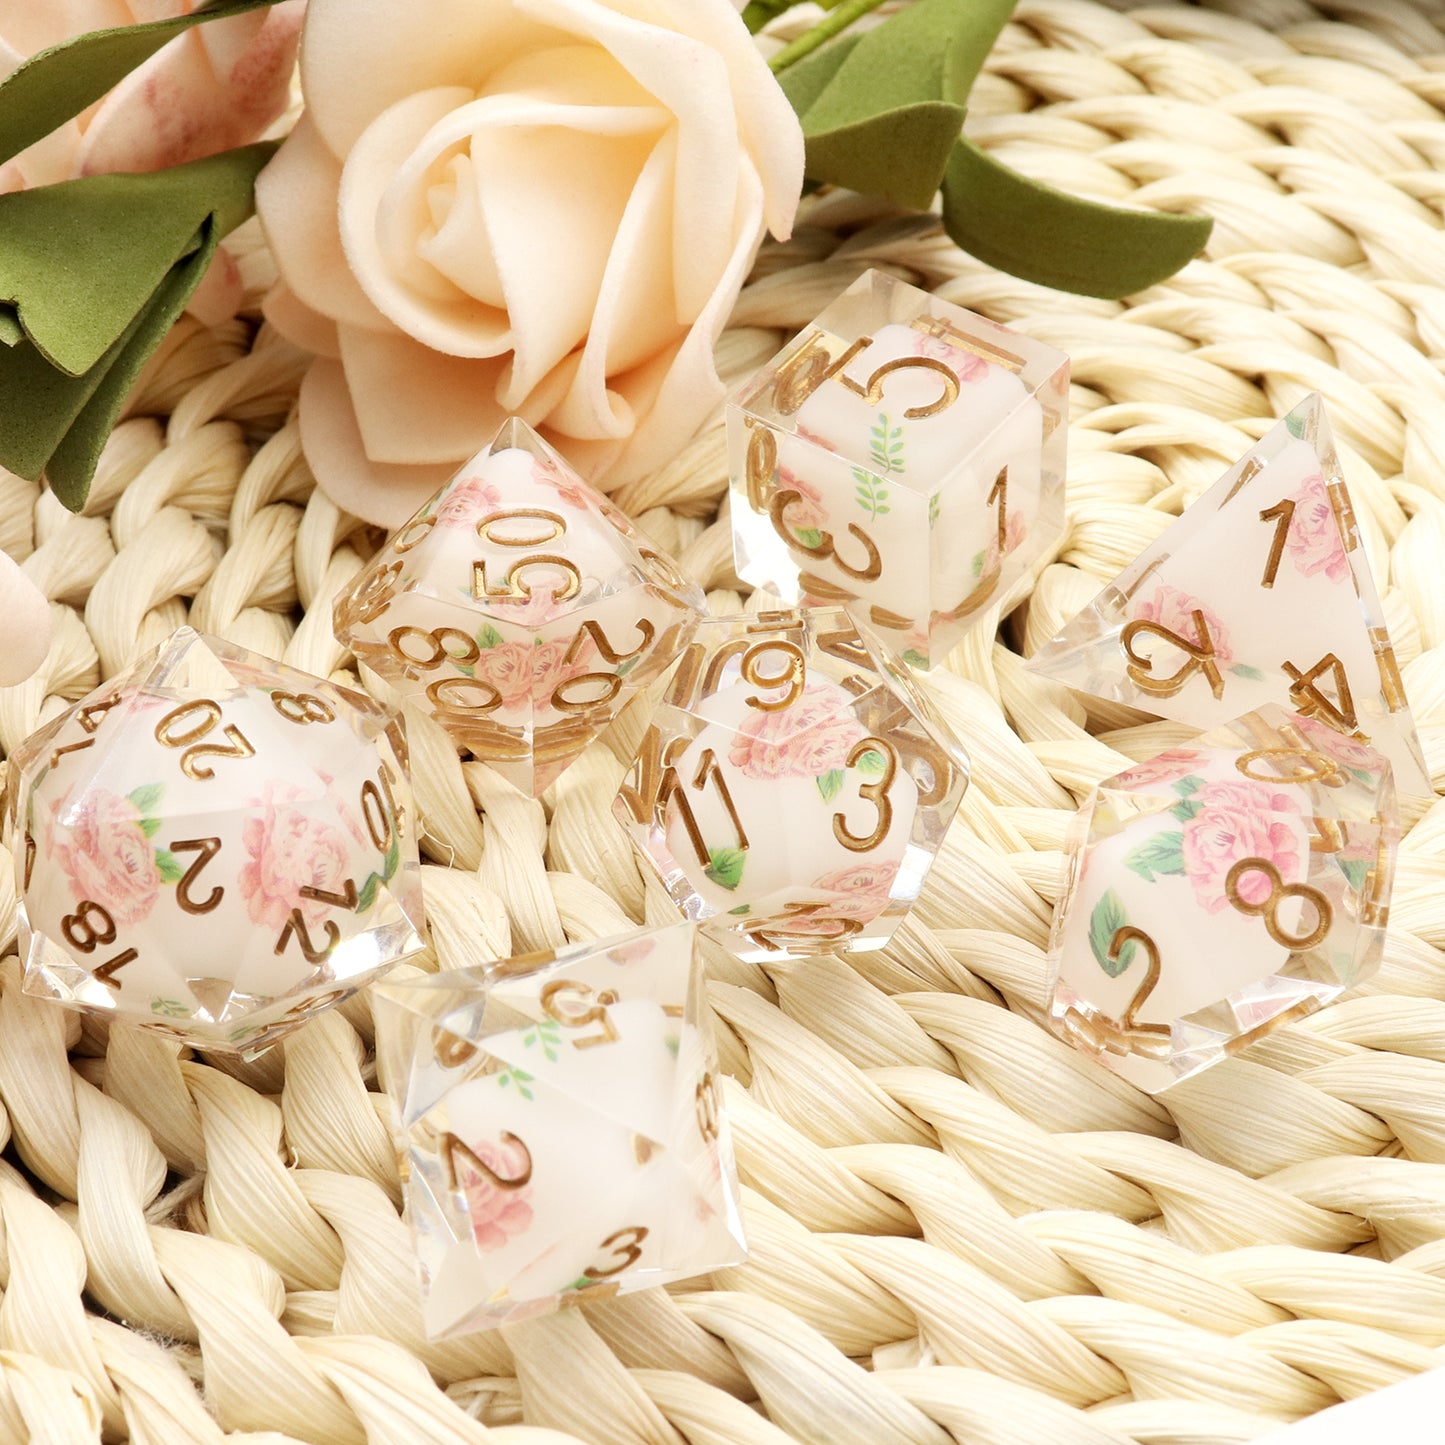 Haxtec Flower Sharp Edge Dice Set DND Dice Pink Rose Sticker D&D Dice for RPG Role Playing Dungeons and Dragons Gift